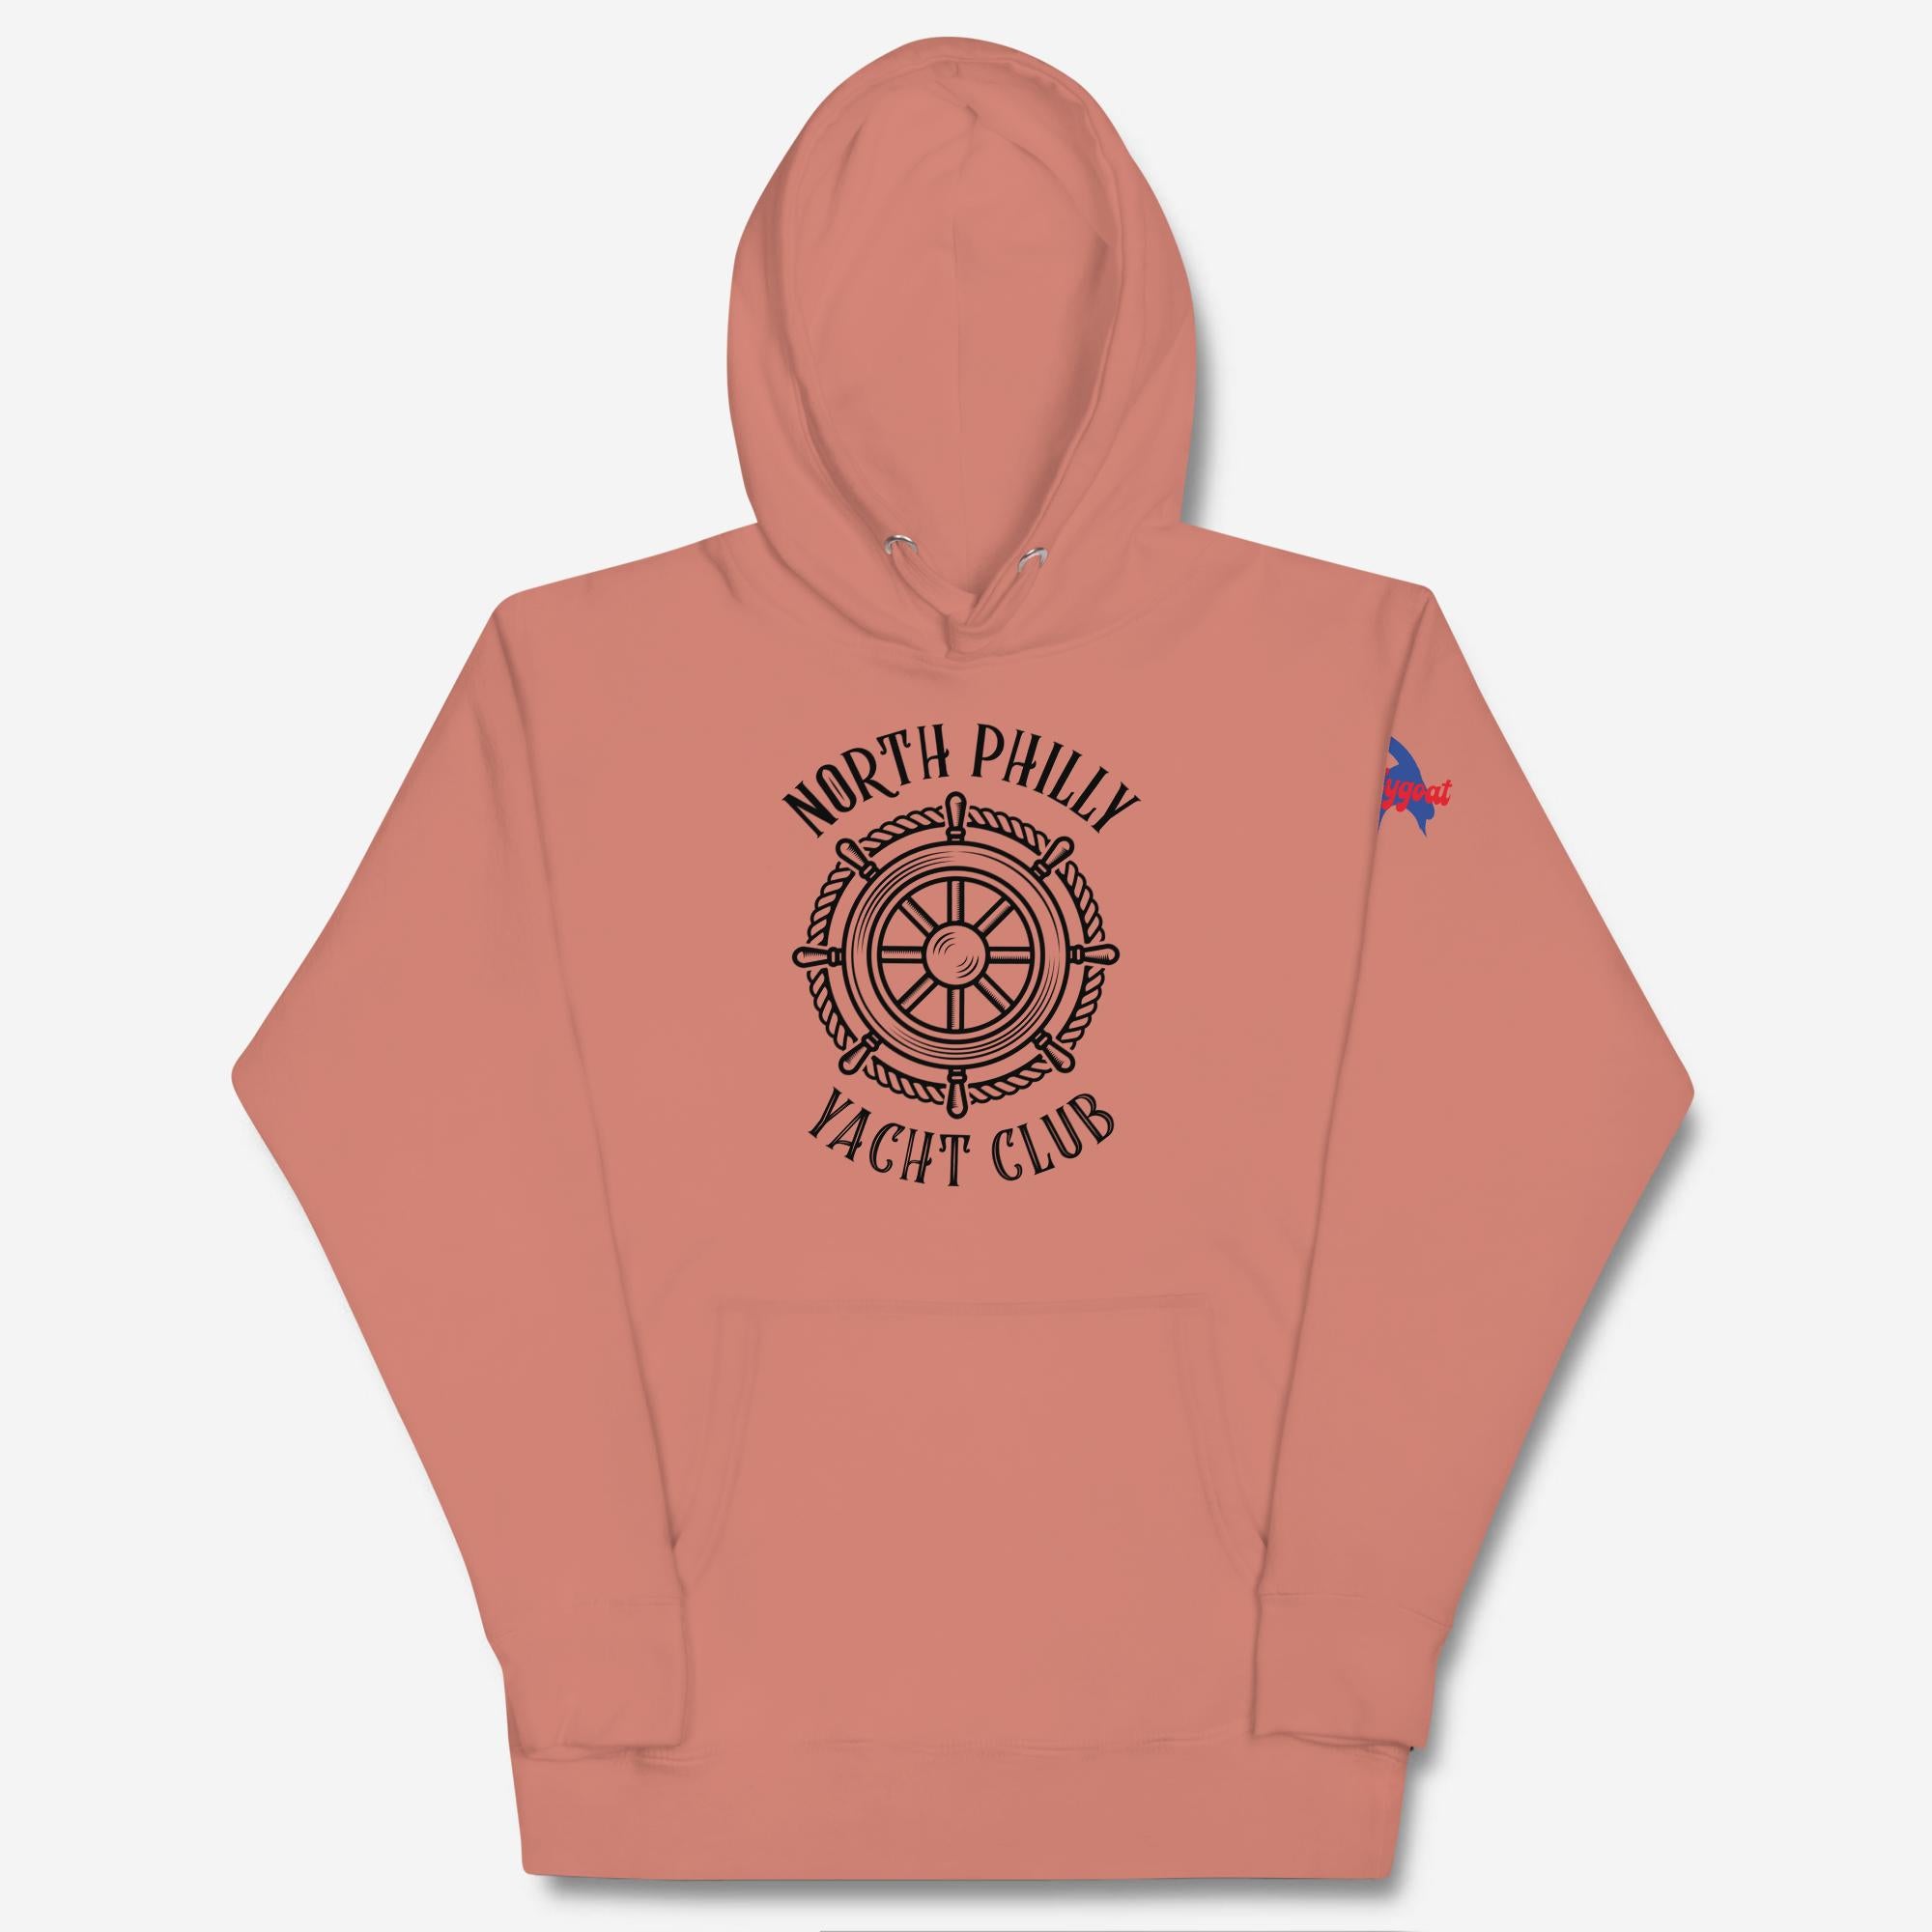 "North Philly Yacht Club" Hoodie